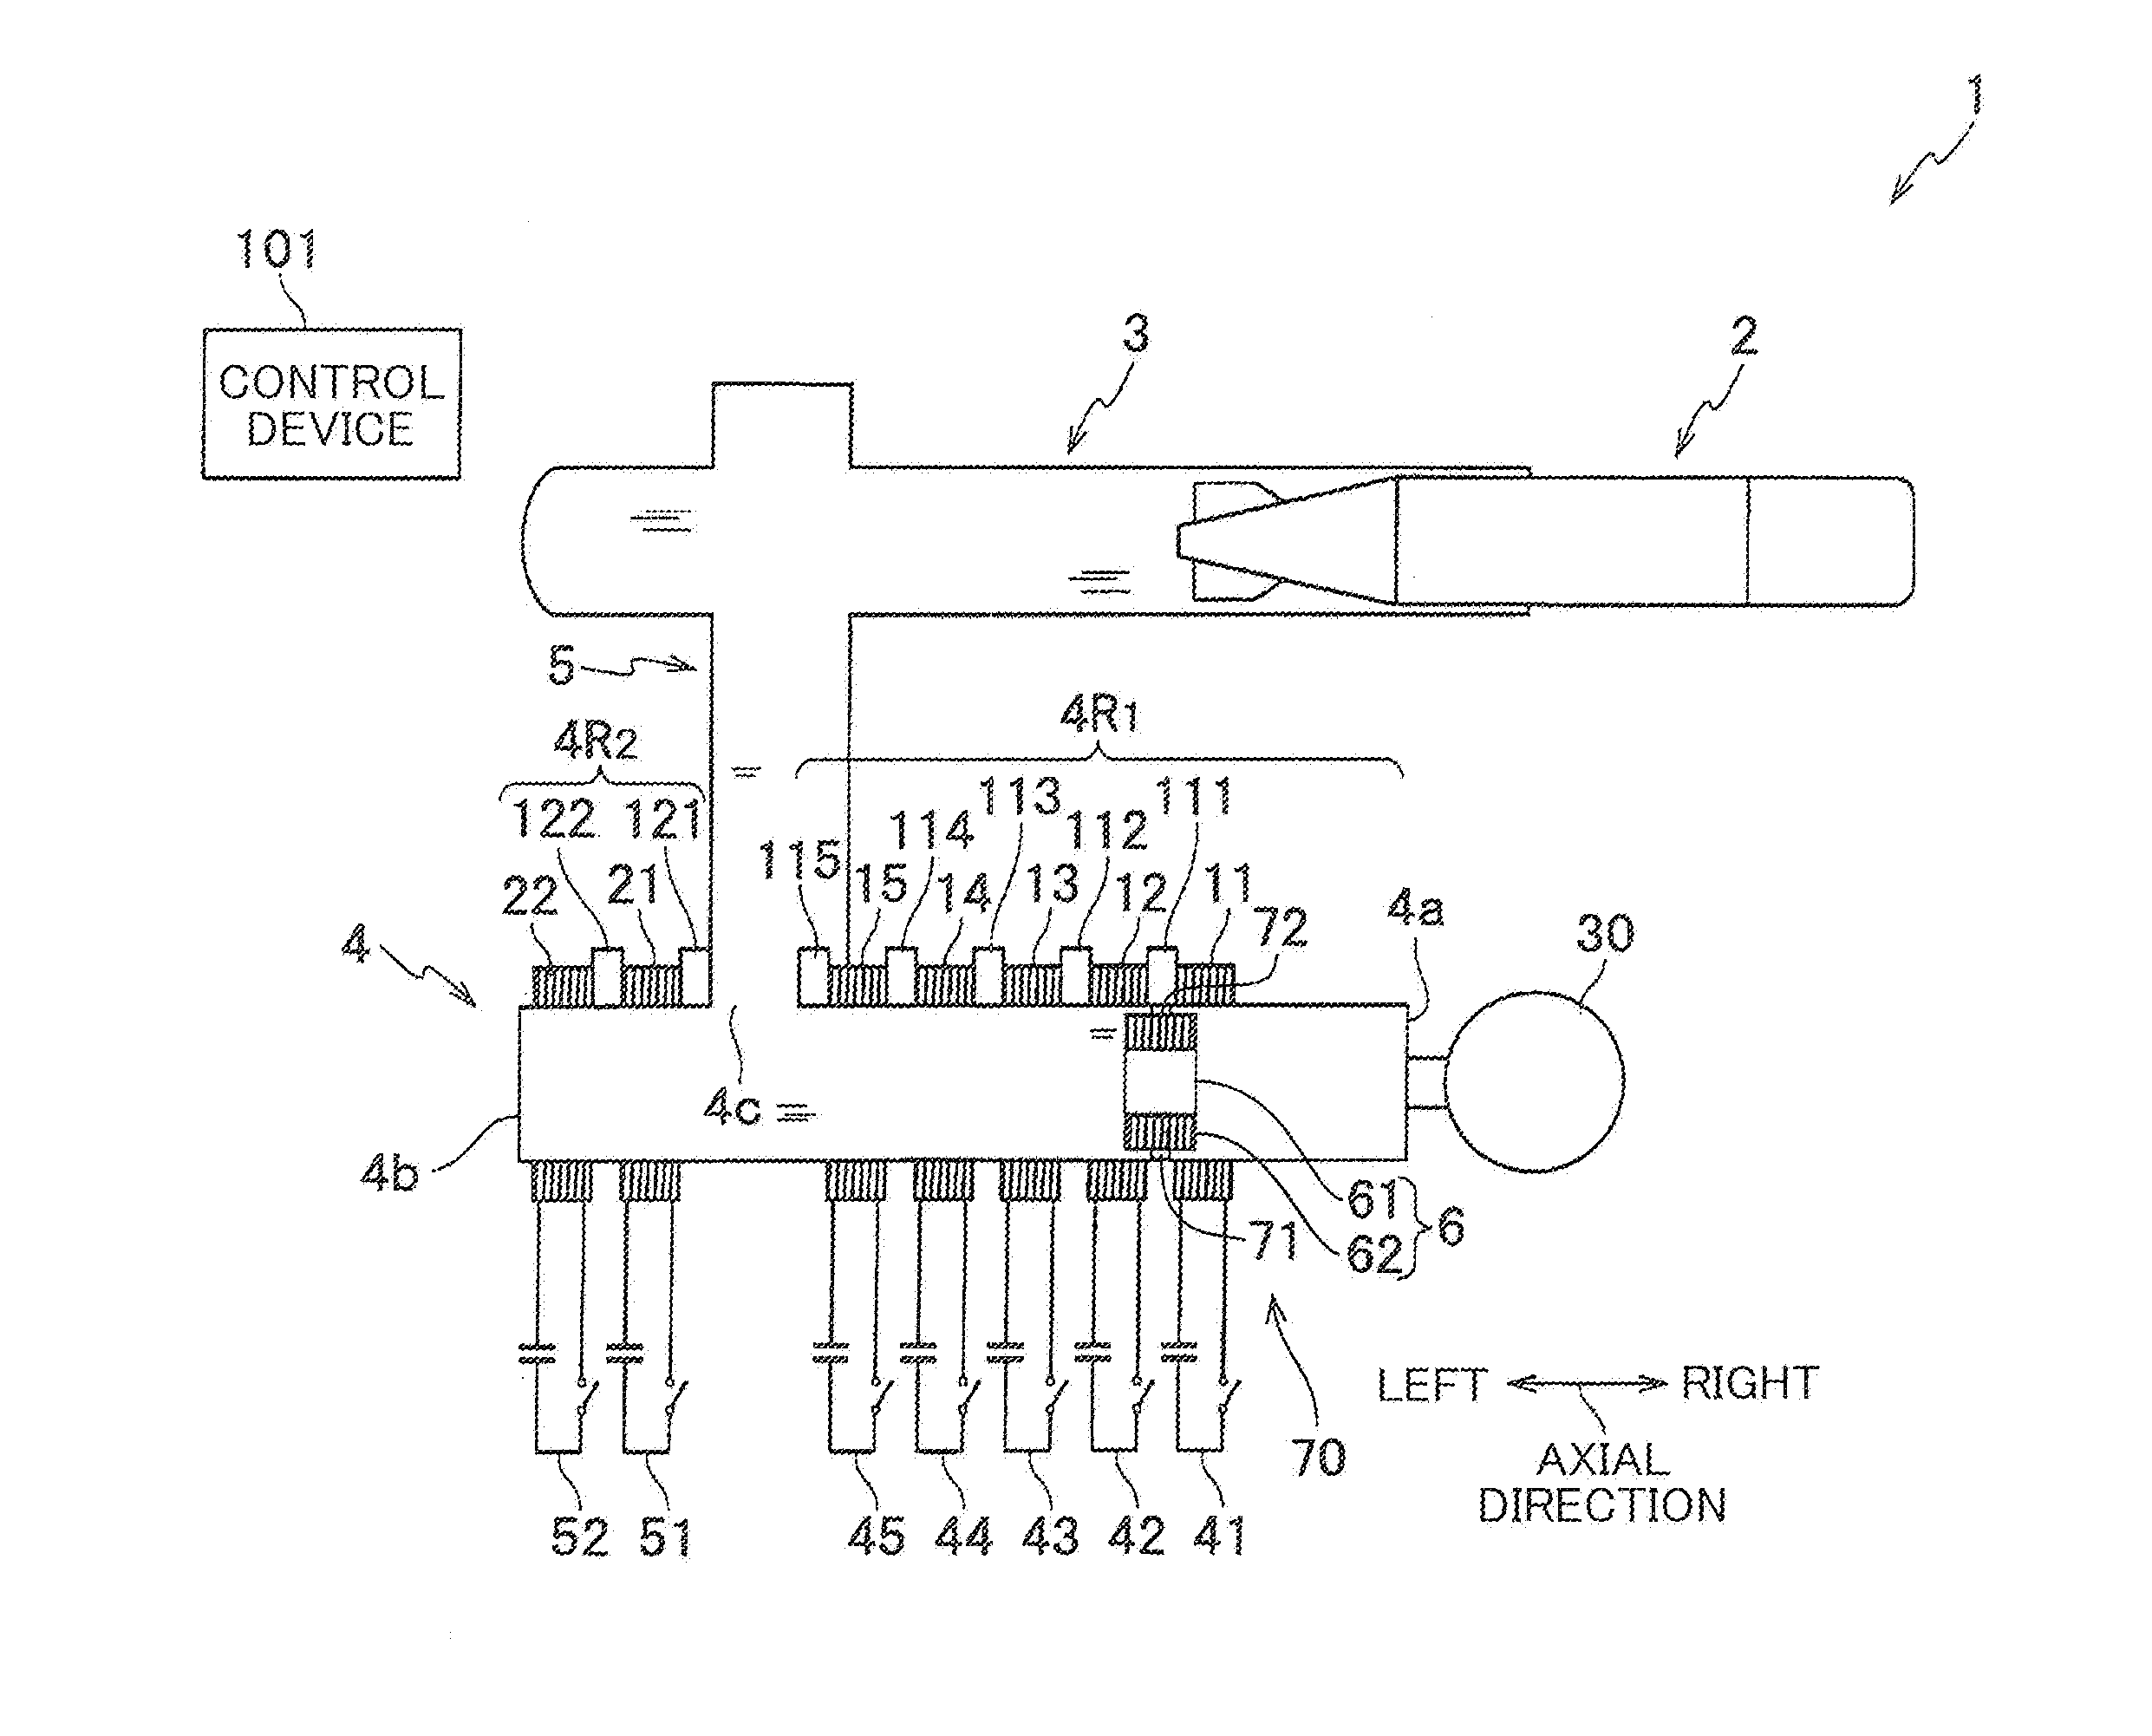 Launching apparatus for underwater payload